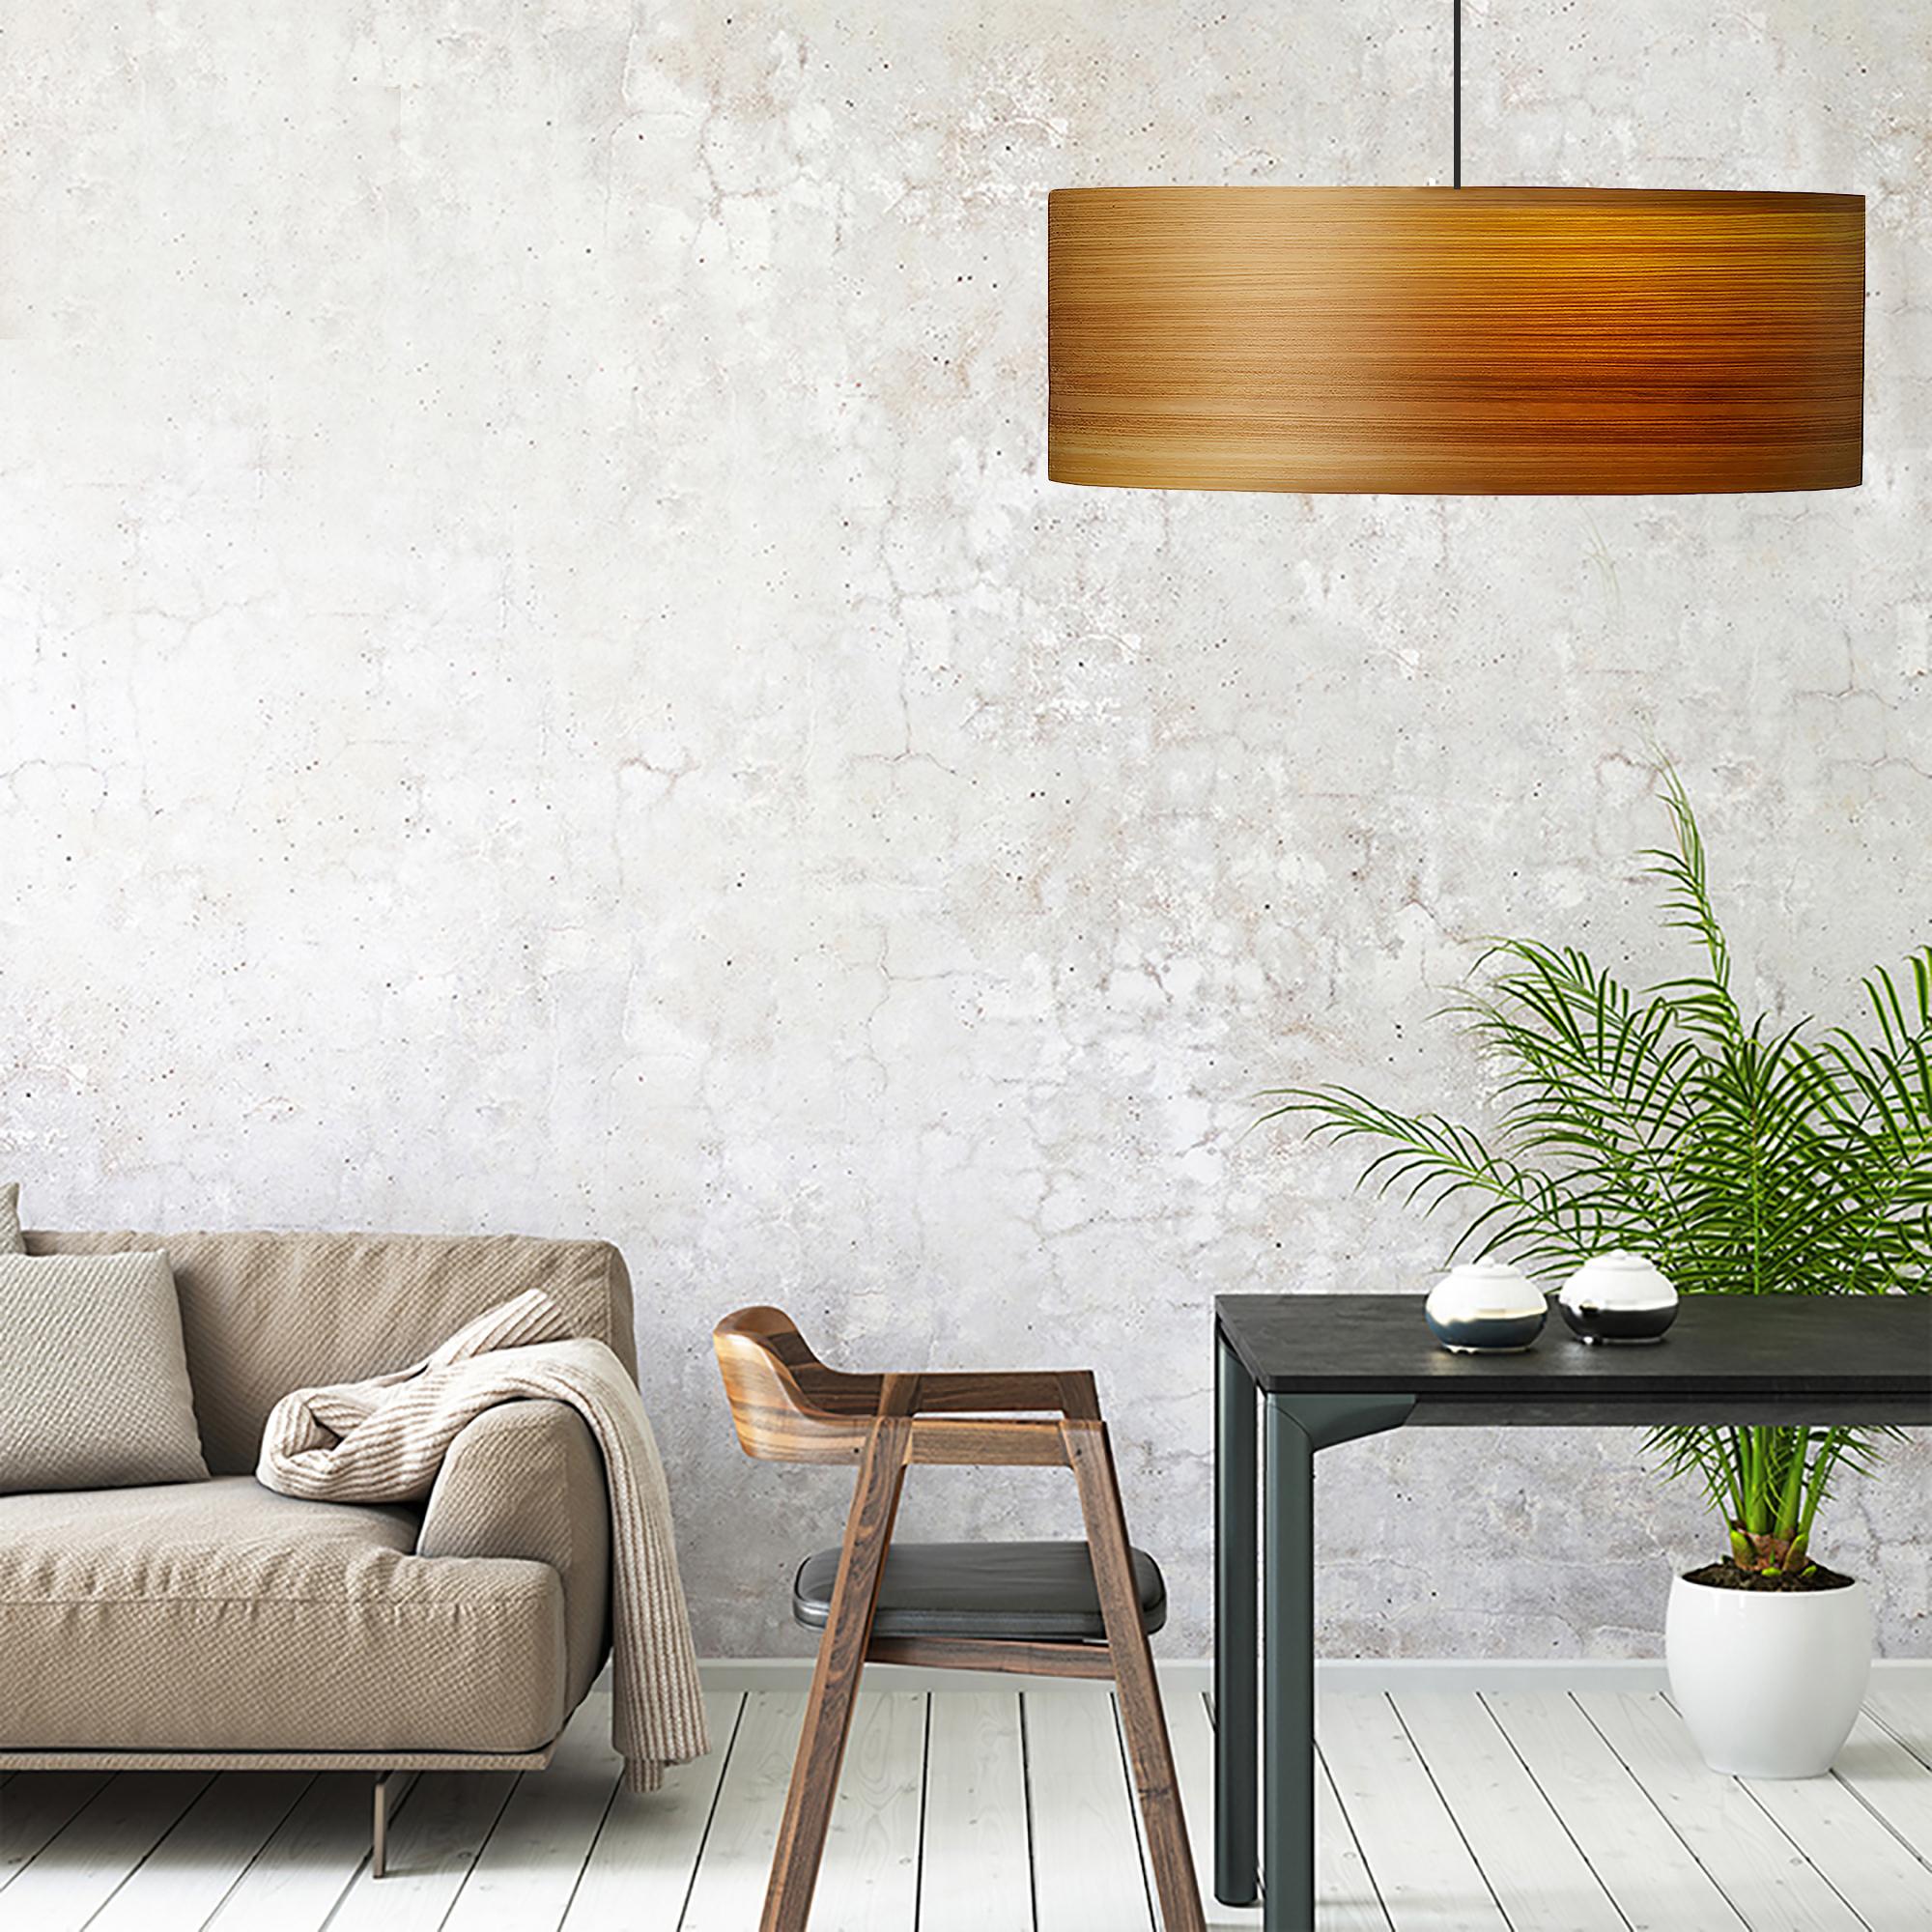 Mid-Century Modern style pendant that designers also use this as a Scandinavian Design statement for great room, entryway, dining room or conference room. This organic modern shade is customizable, offered in several wood types. Giving a warm light,